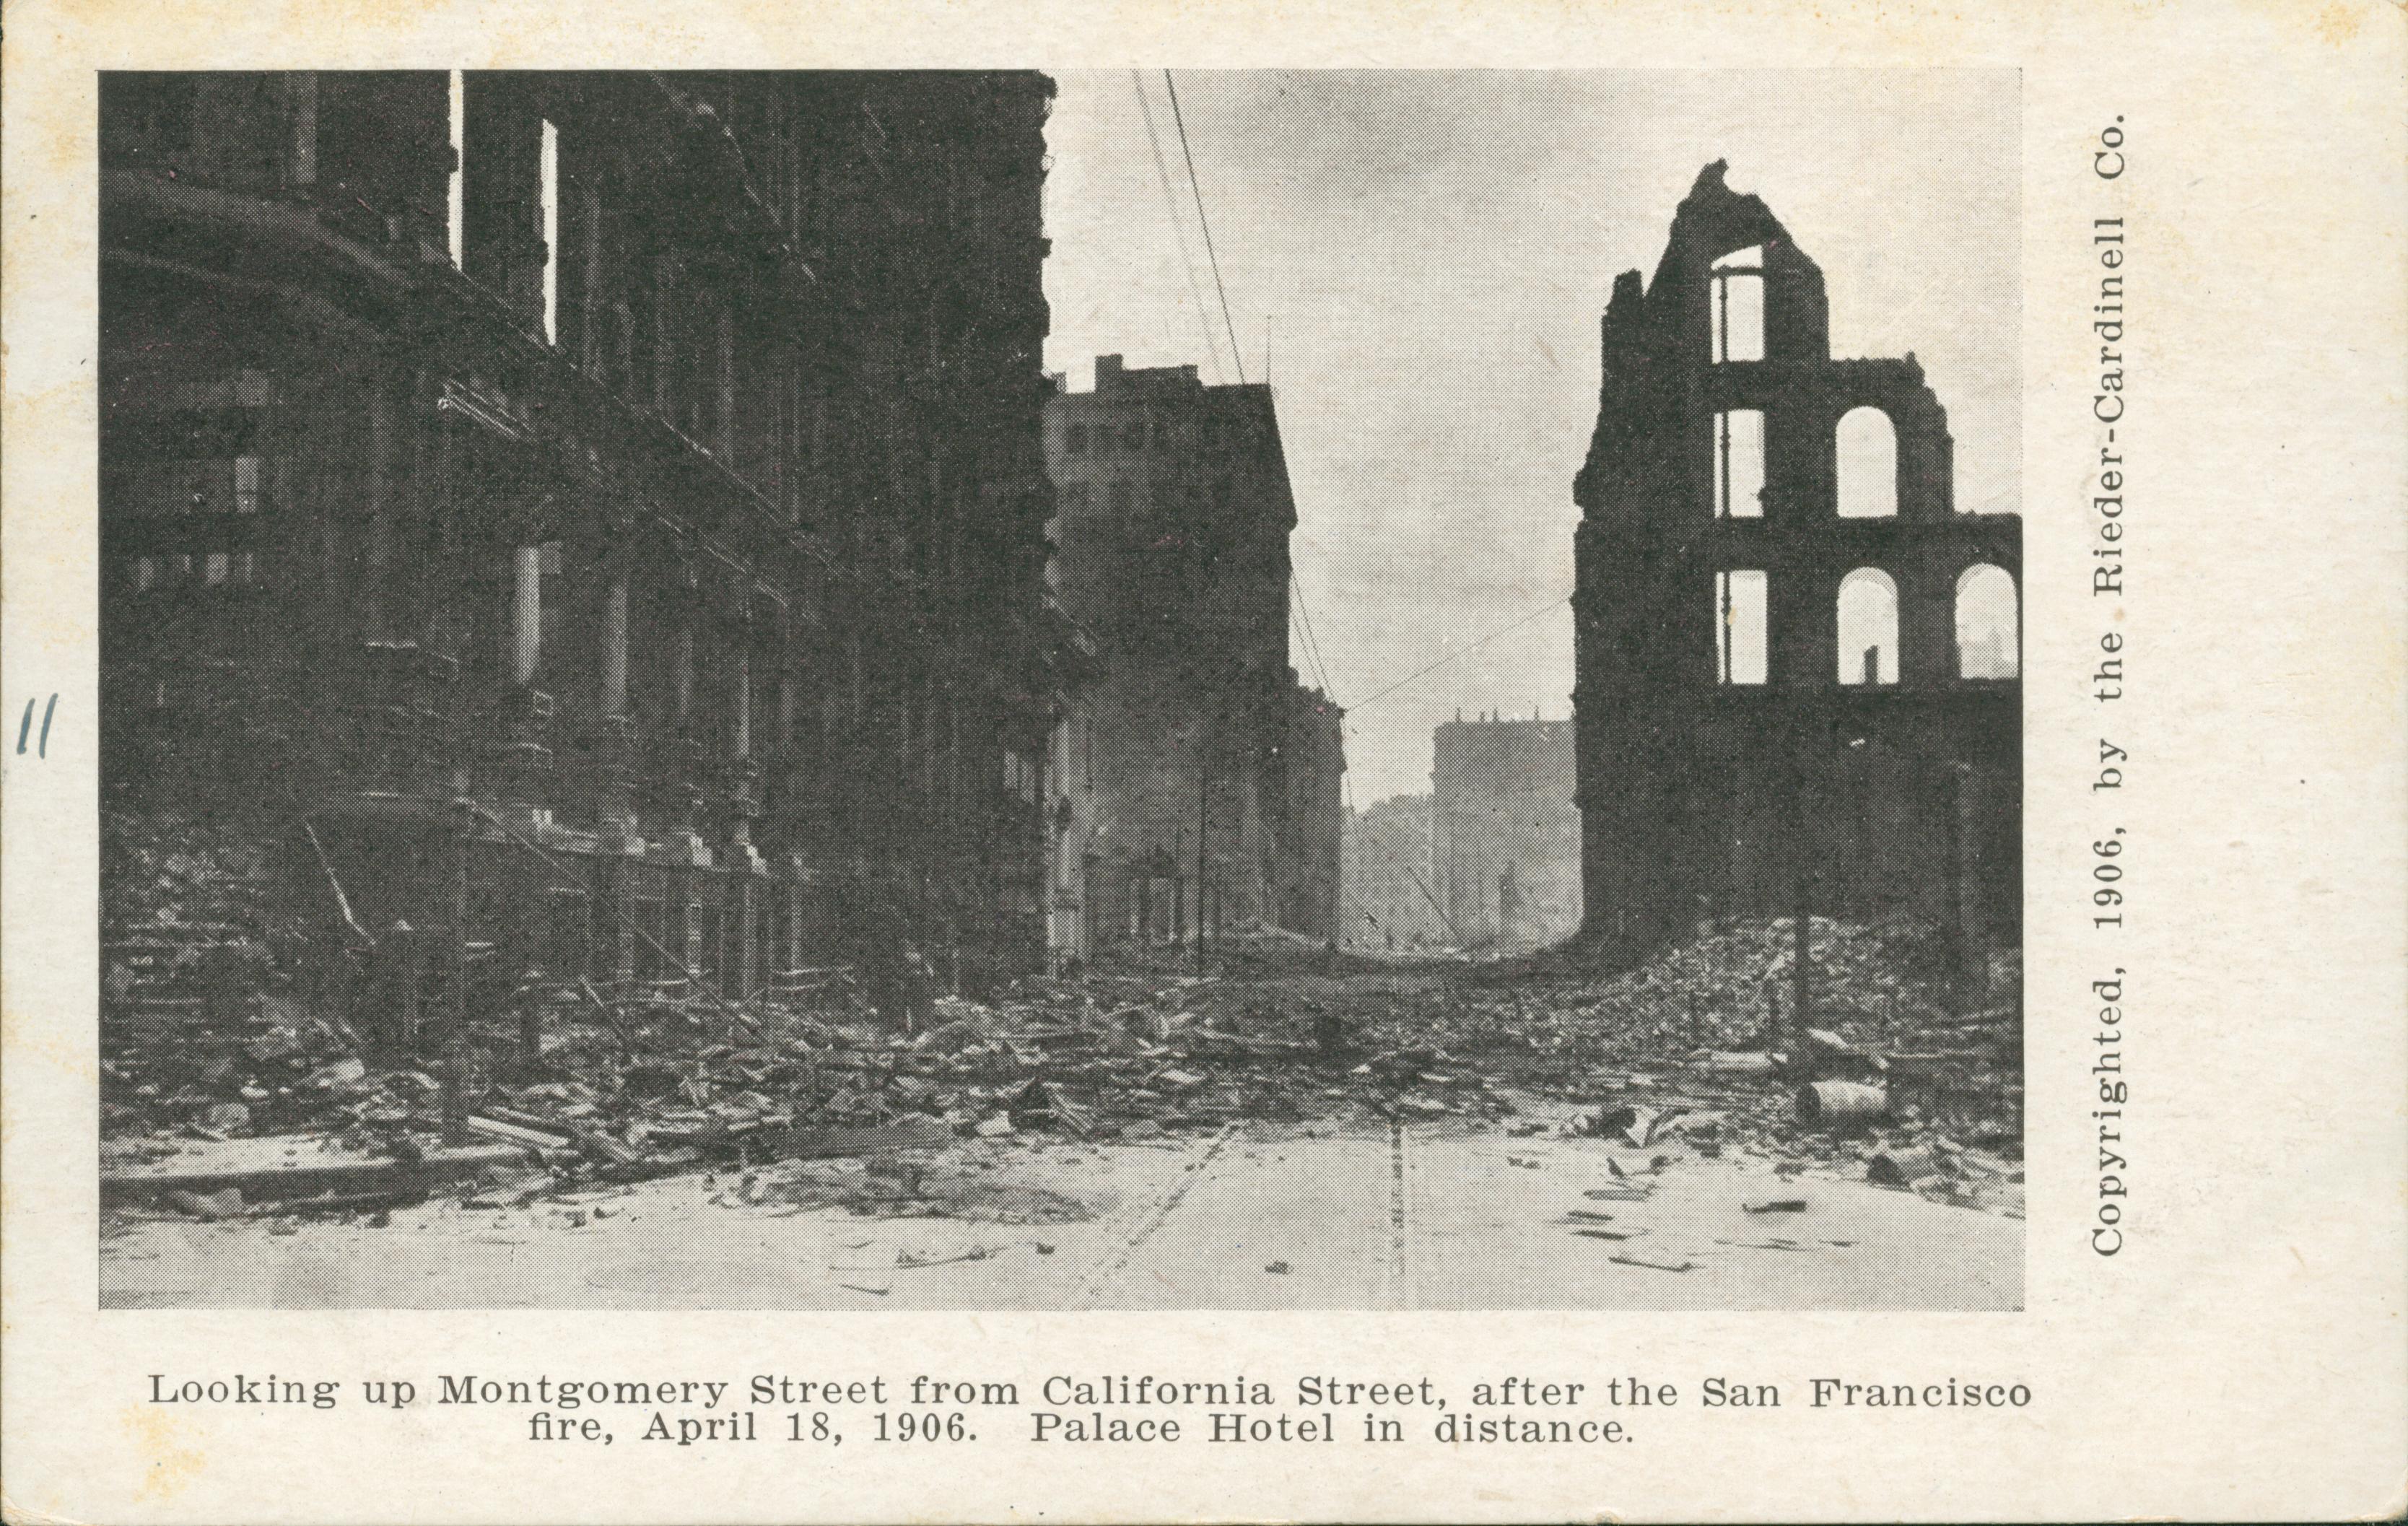 Shows destroyed building on both sides of a street with the Palace Hotel in the background.